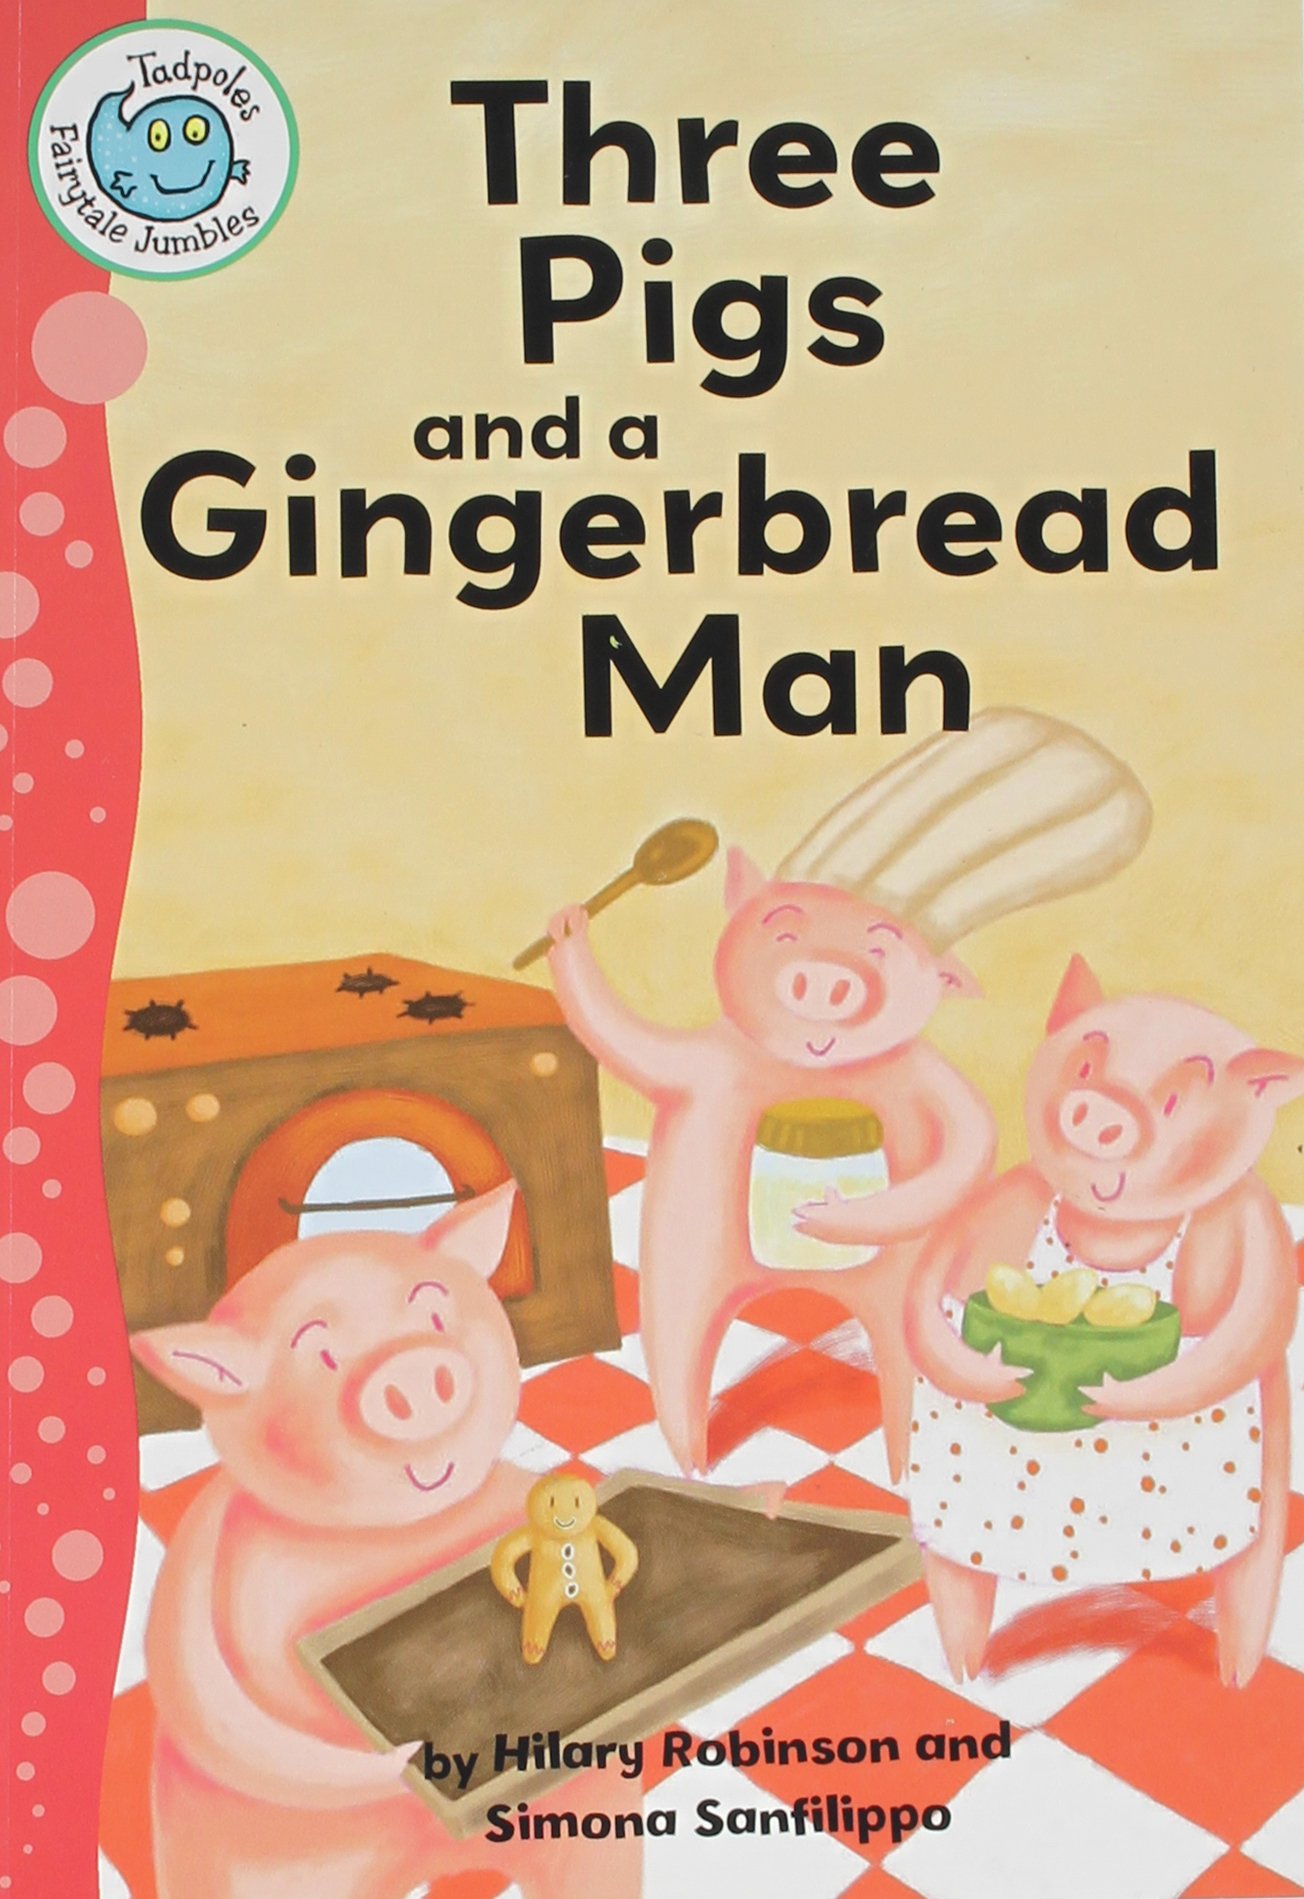 Three pigs and a gingerbread man